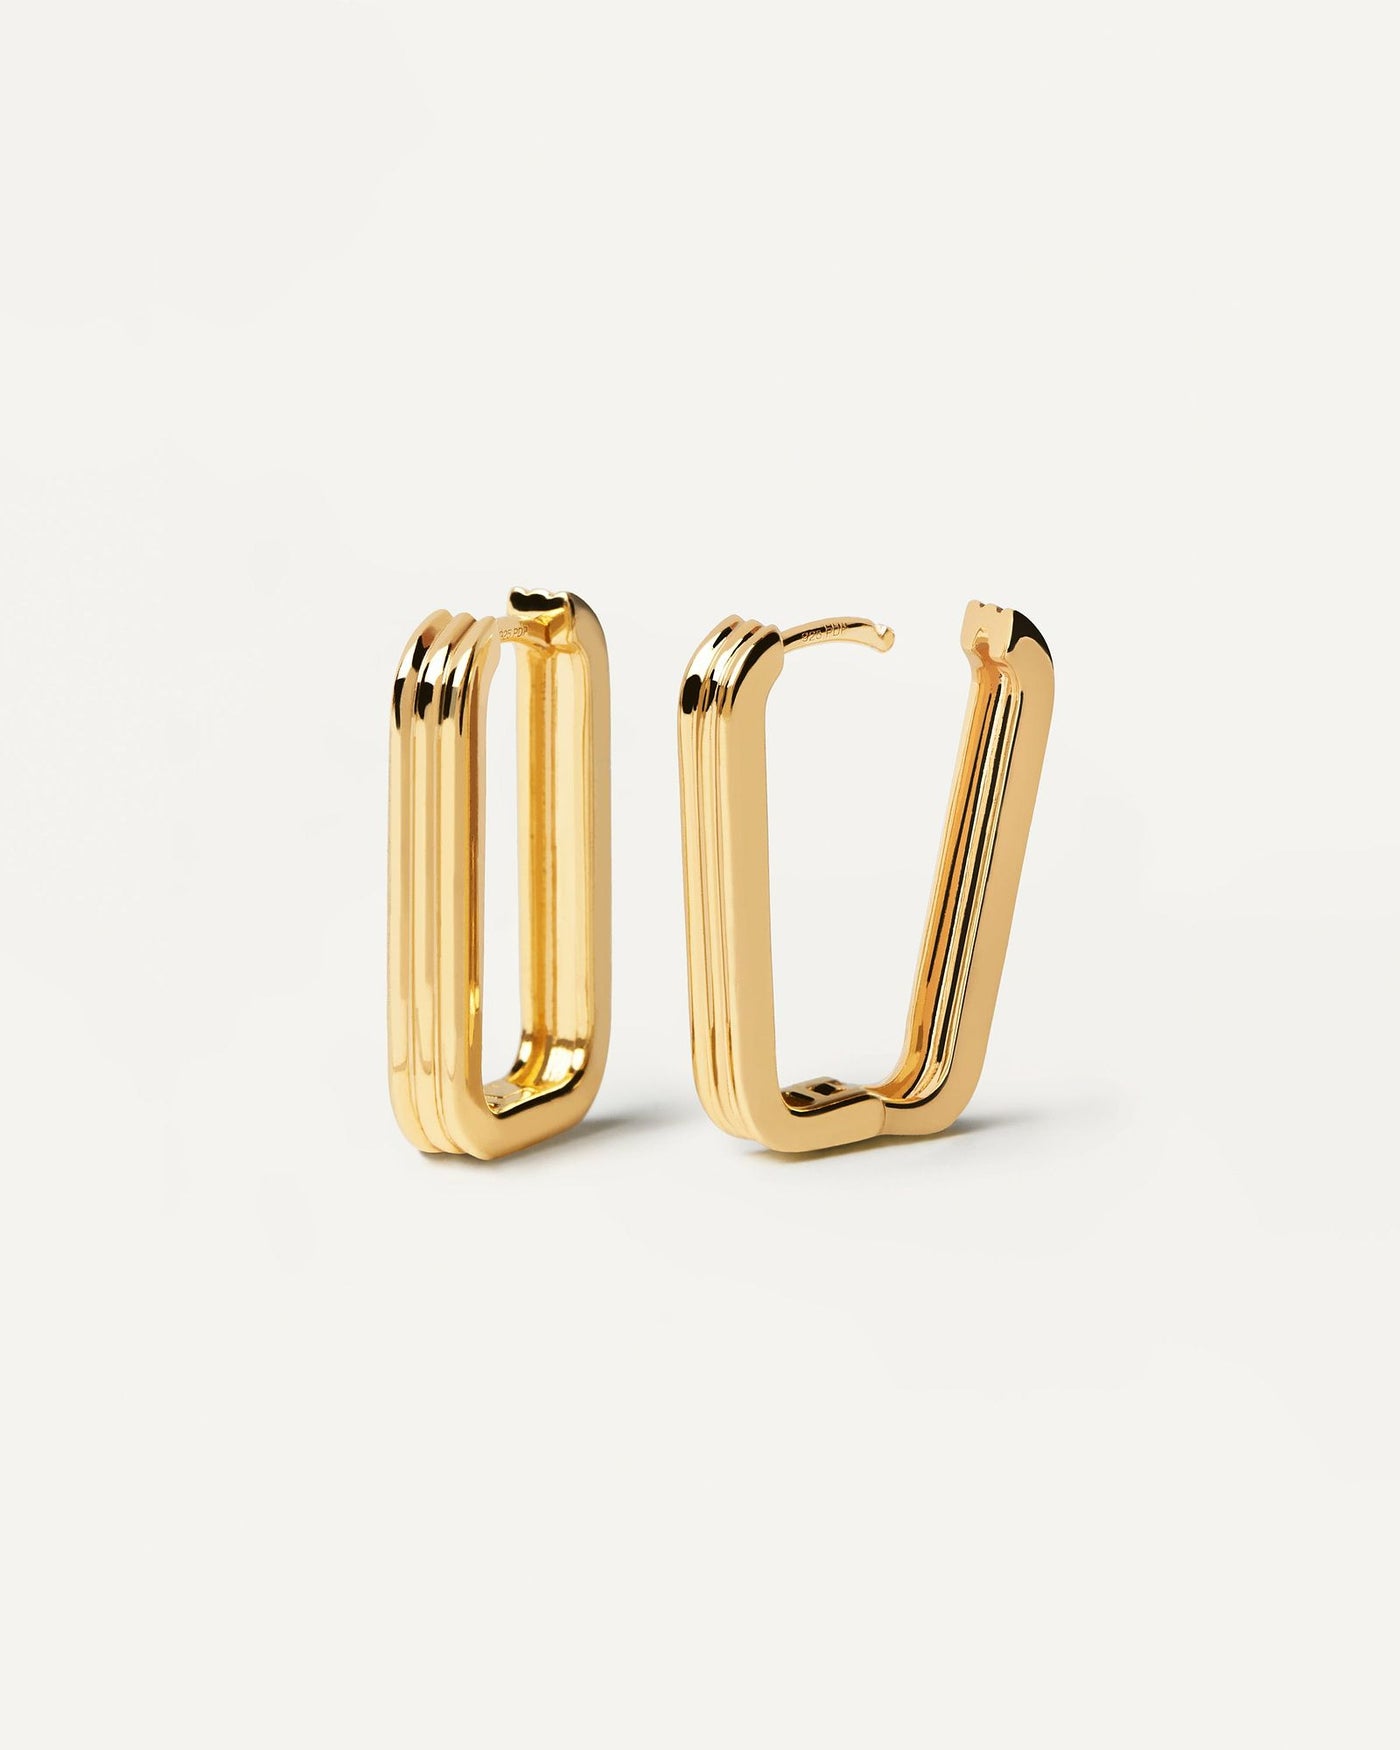 2024 Selection | Super Nova Earrings. Squarred hoops in gold-plated silver with 3 bands design. Get the latest arrival from PDPAOLA. Place your order safely and get this Best Seller. Free Shipping.